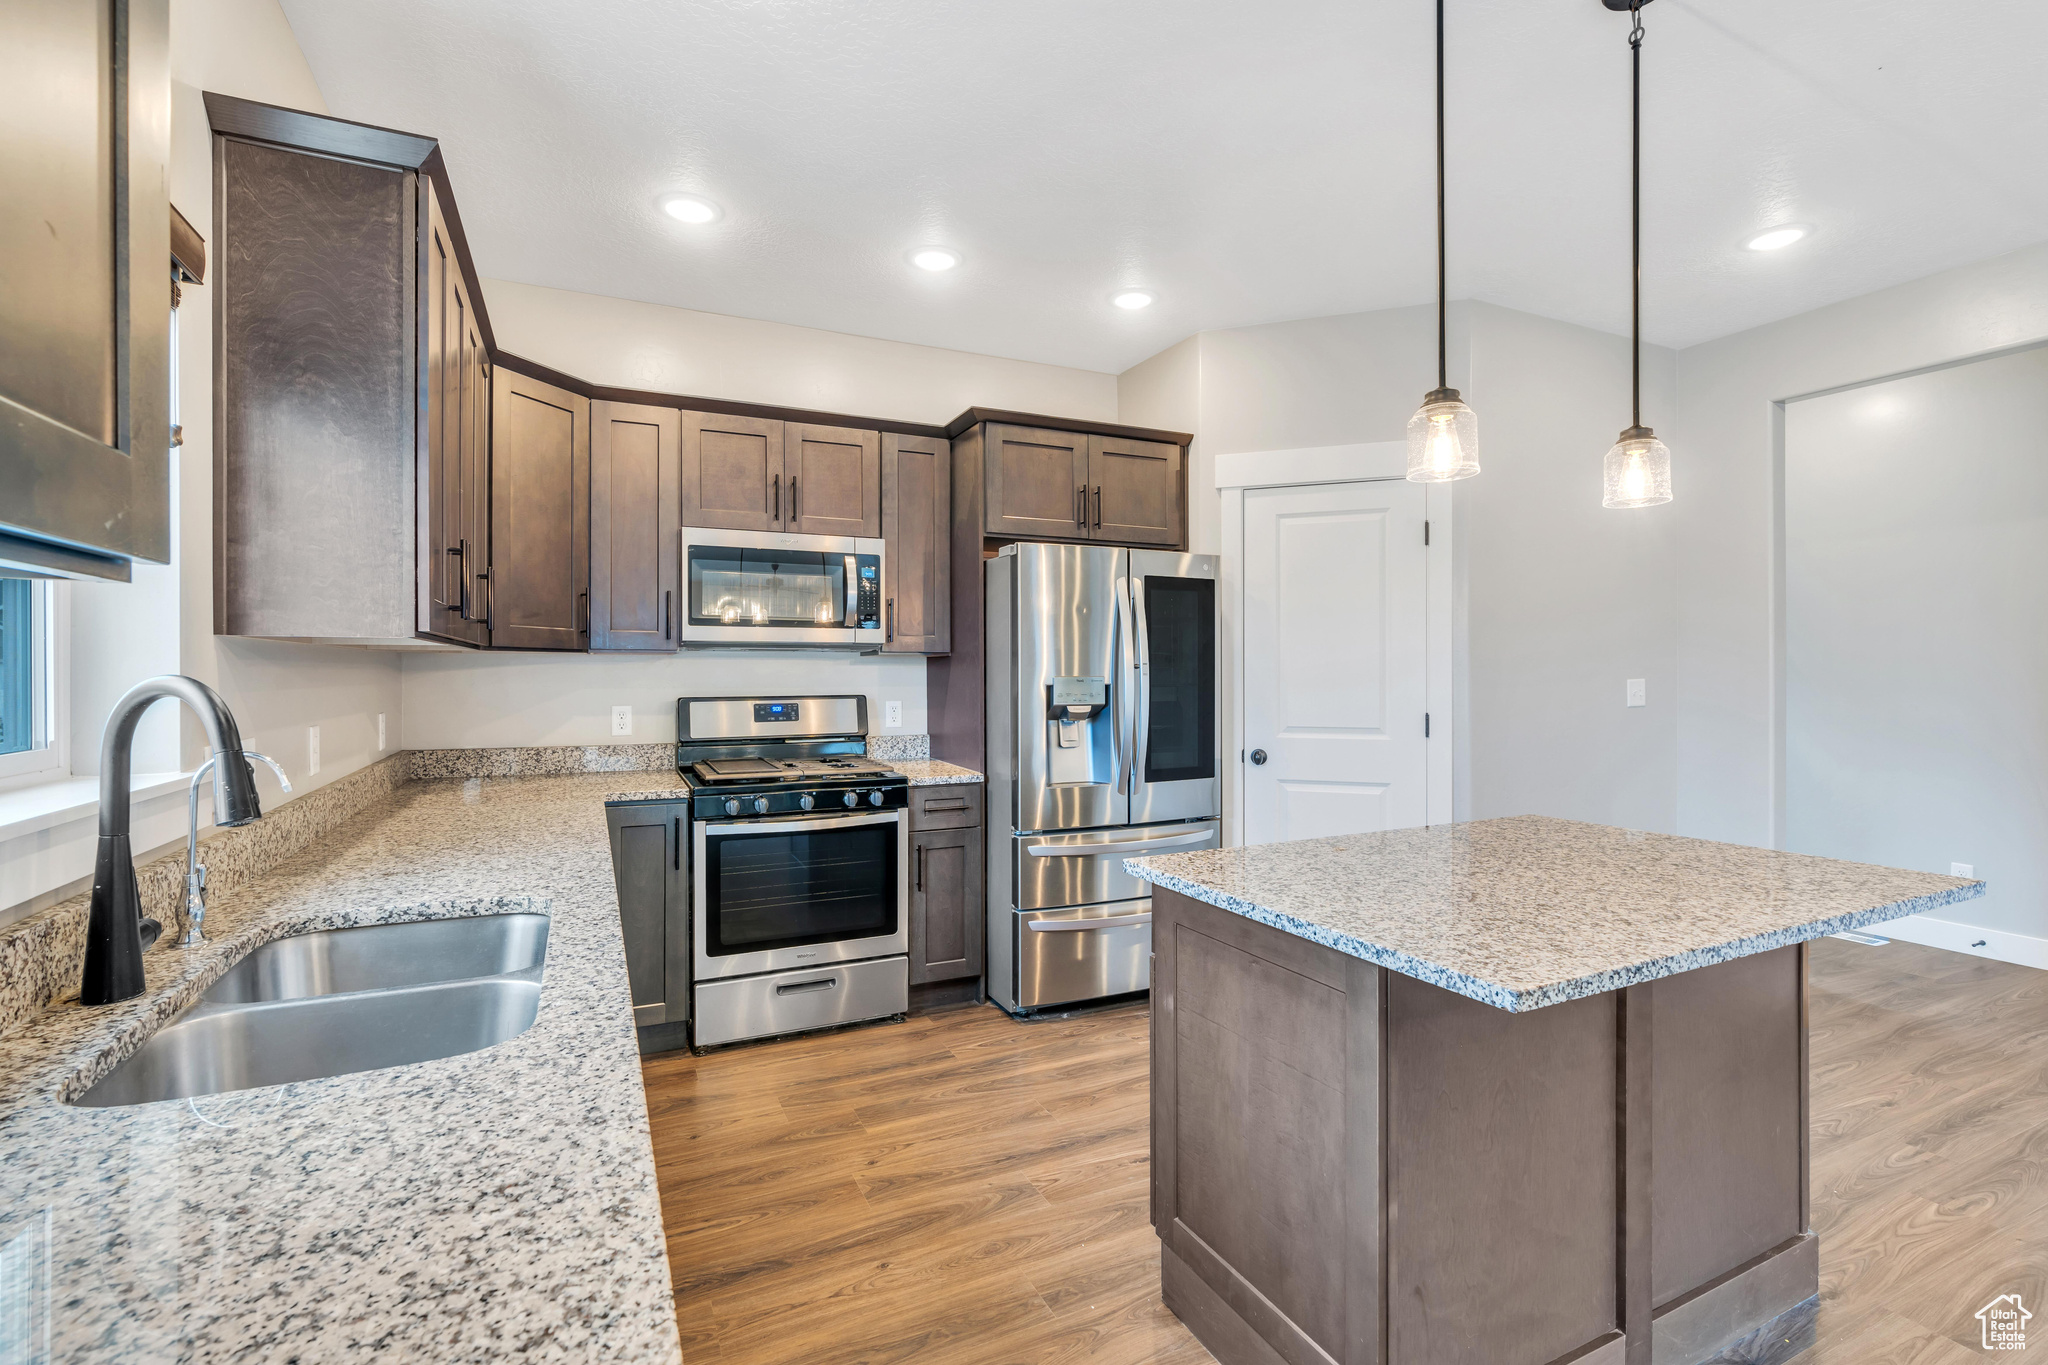 Kitchen featuring appliances with stainless steel finishes, sink, light hardwood / wood-style floors, hanging light fixtures, and light stone countertops